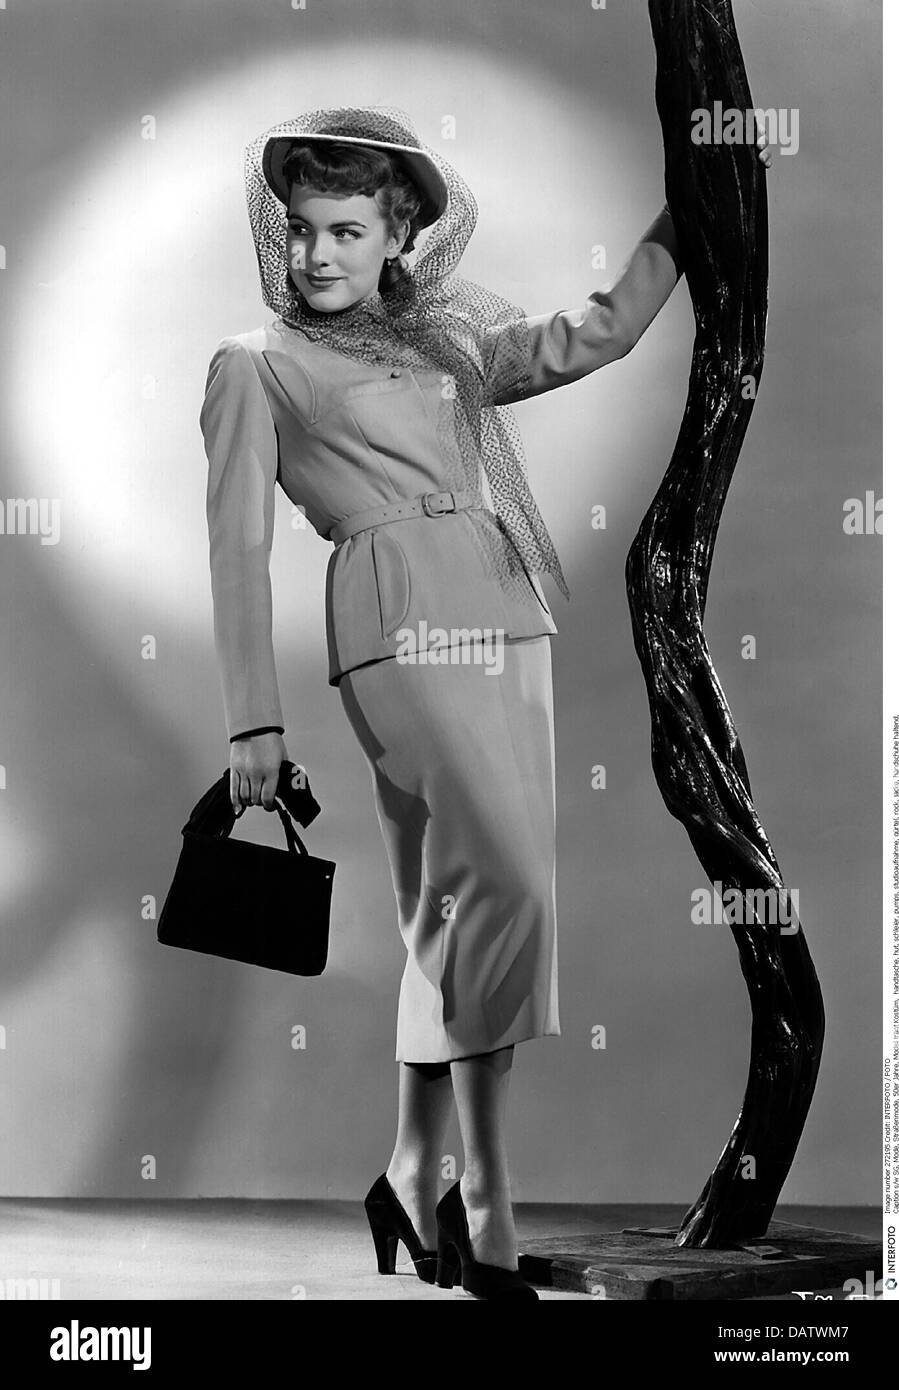 fashion, 1950s, ladies' fashion, streetwear, woman wearing woman's suit, Additional-Rights-Clearences-Not Available Stock Photo